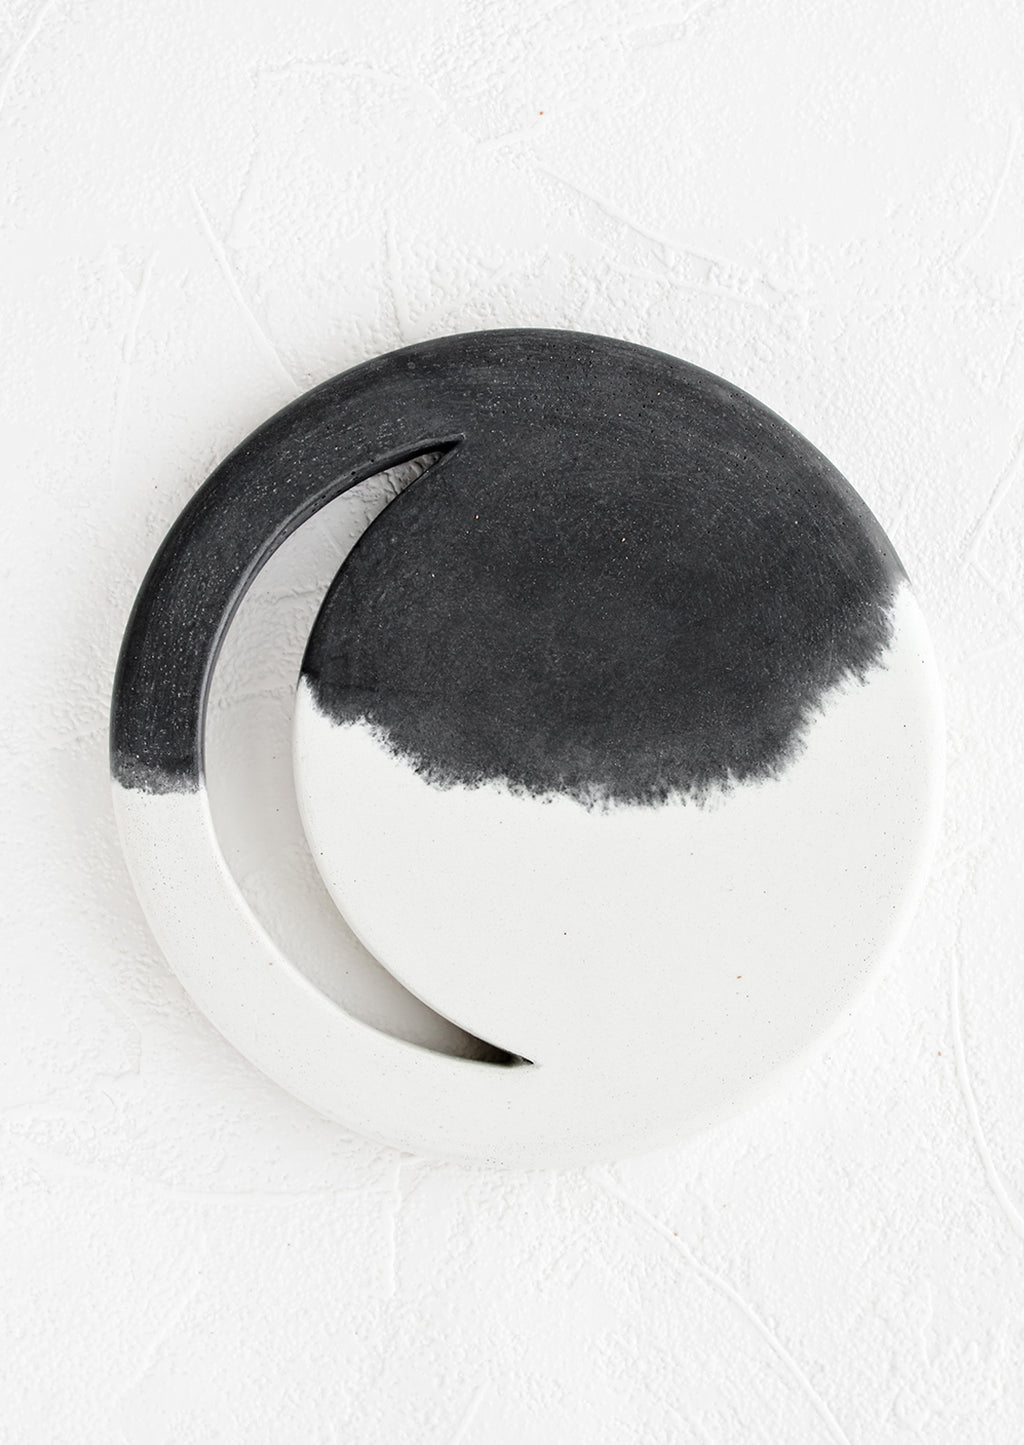 Black & White: A round concrete trivet in black and white with crescent moon shaped cutout.